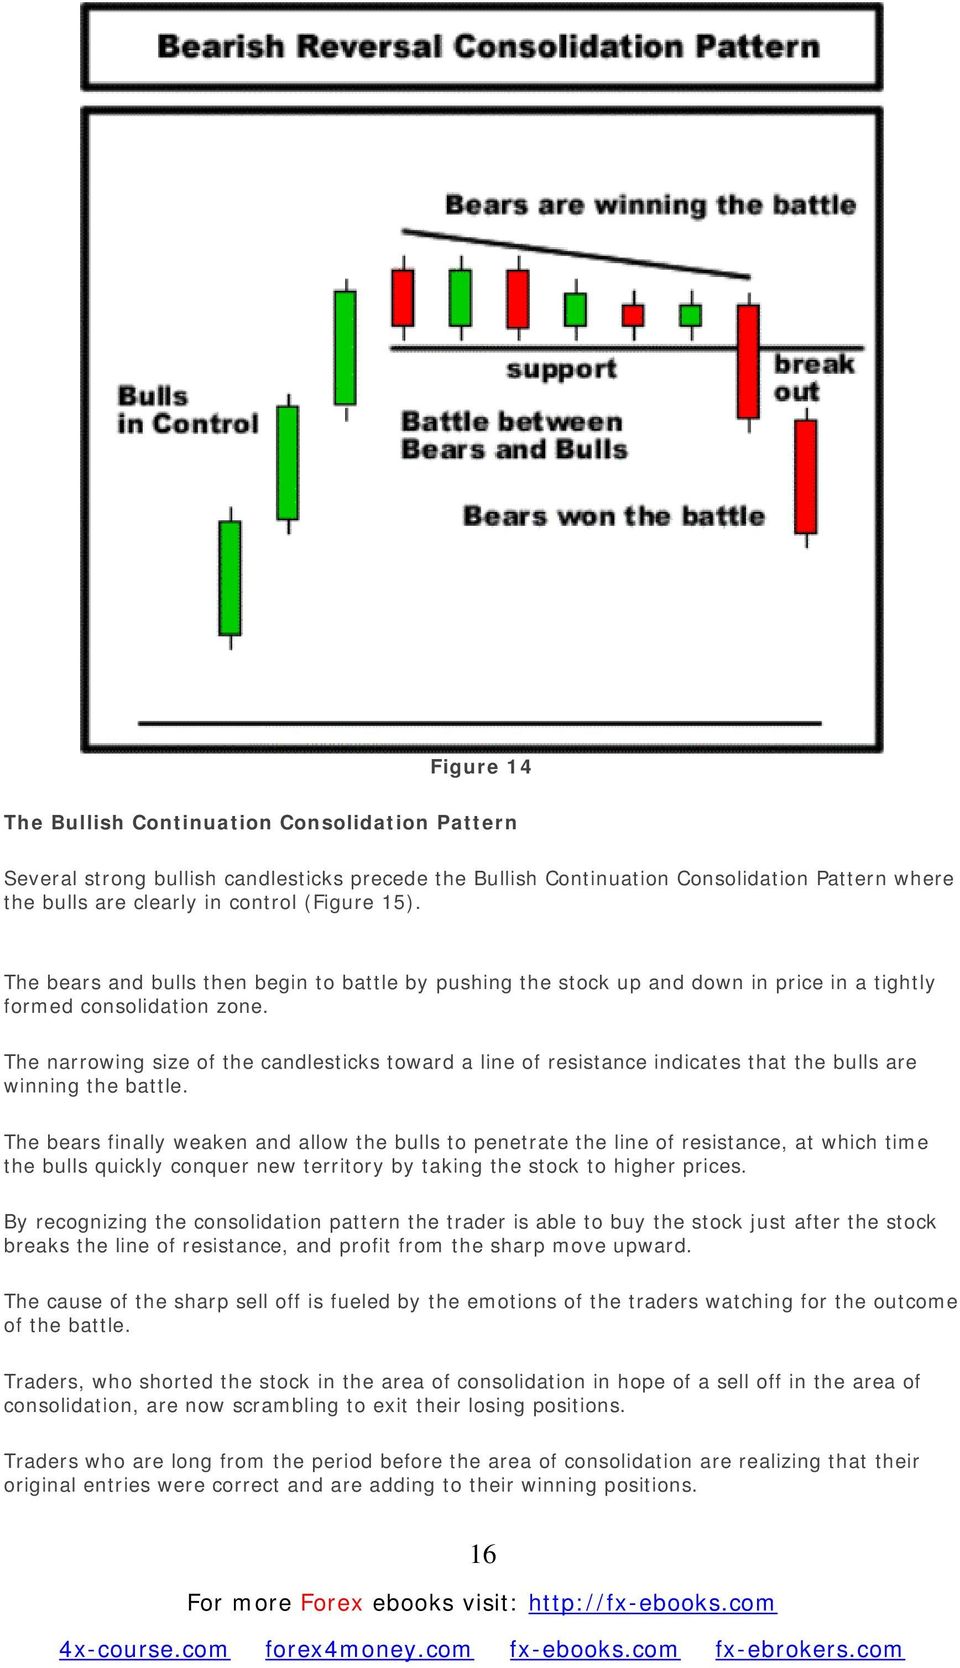 The narrowing size of the candlesticks toward a line of resistance indicates that the bulls are winning the battle.